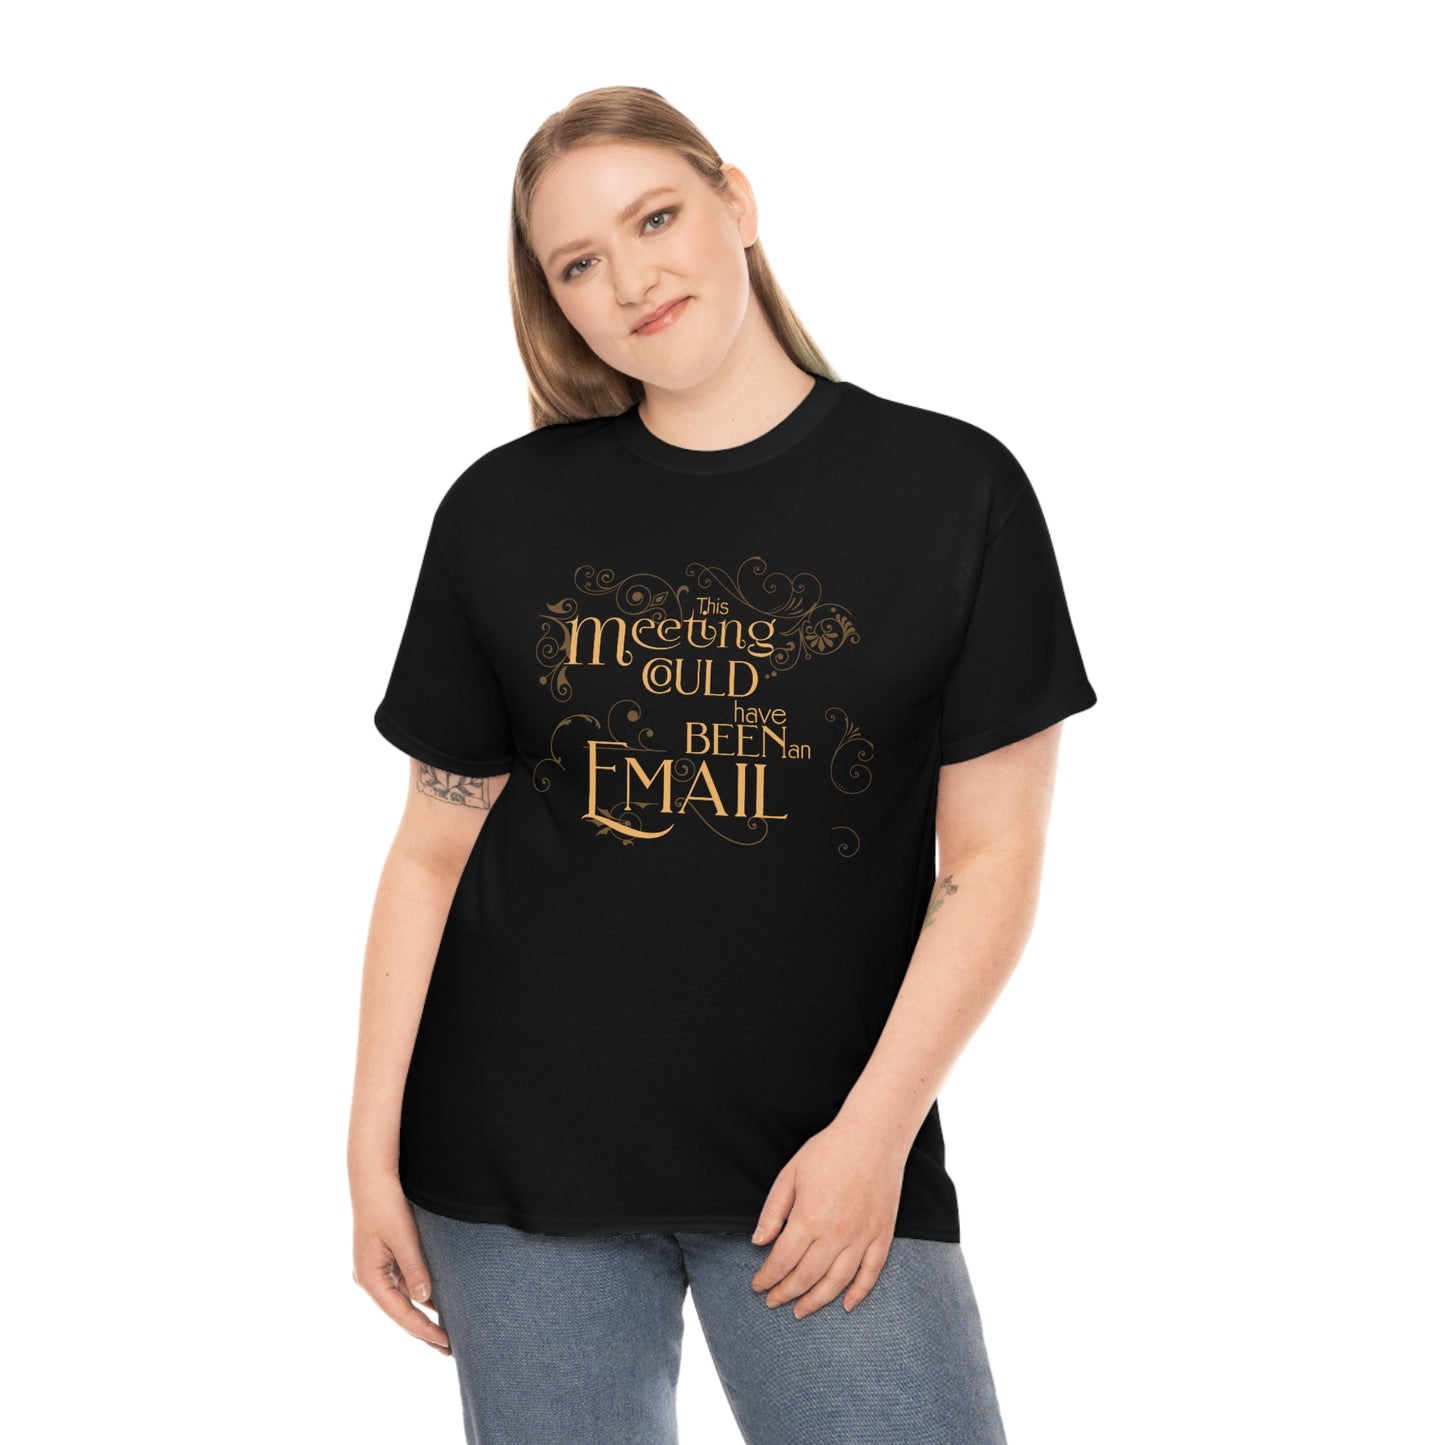 Could Have Been Email Unisex Cotton T-shirt